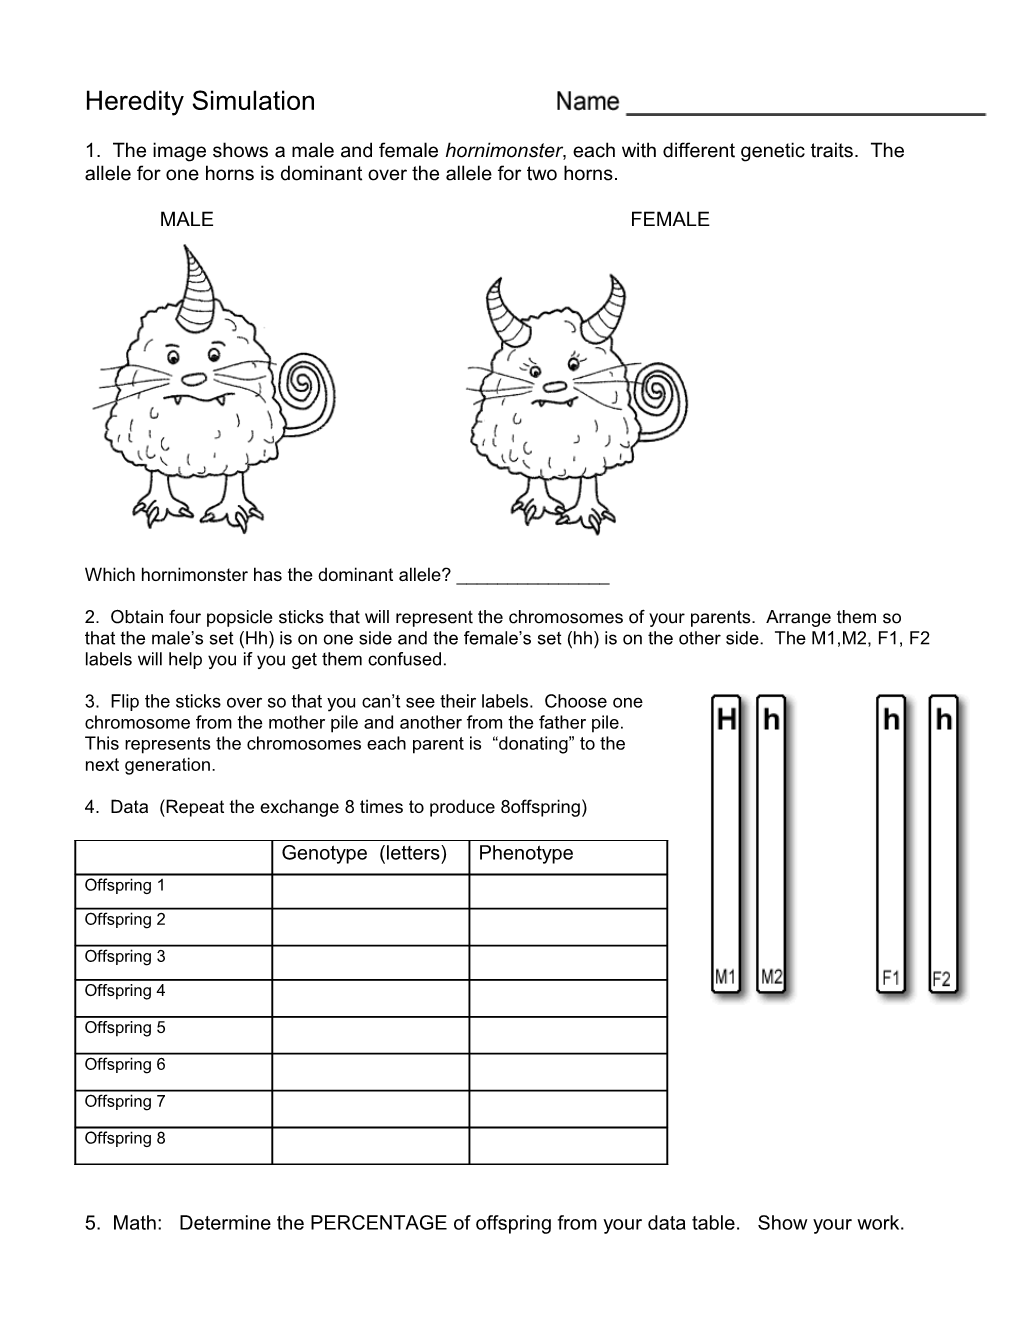 Which Hornimonster Has the Dominant Allele? ______